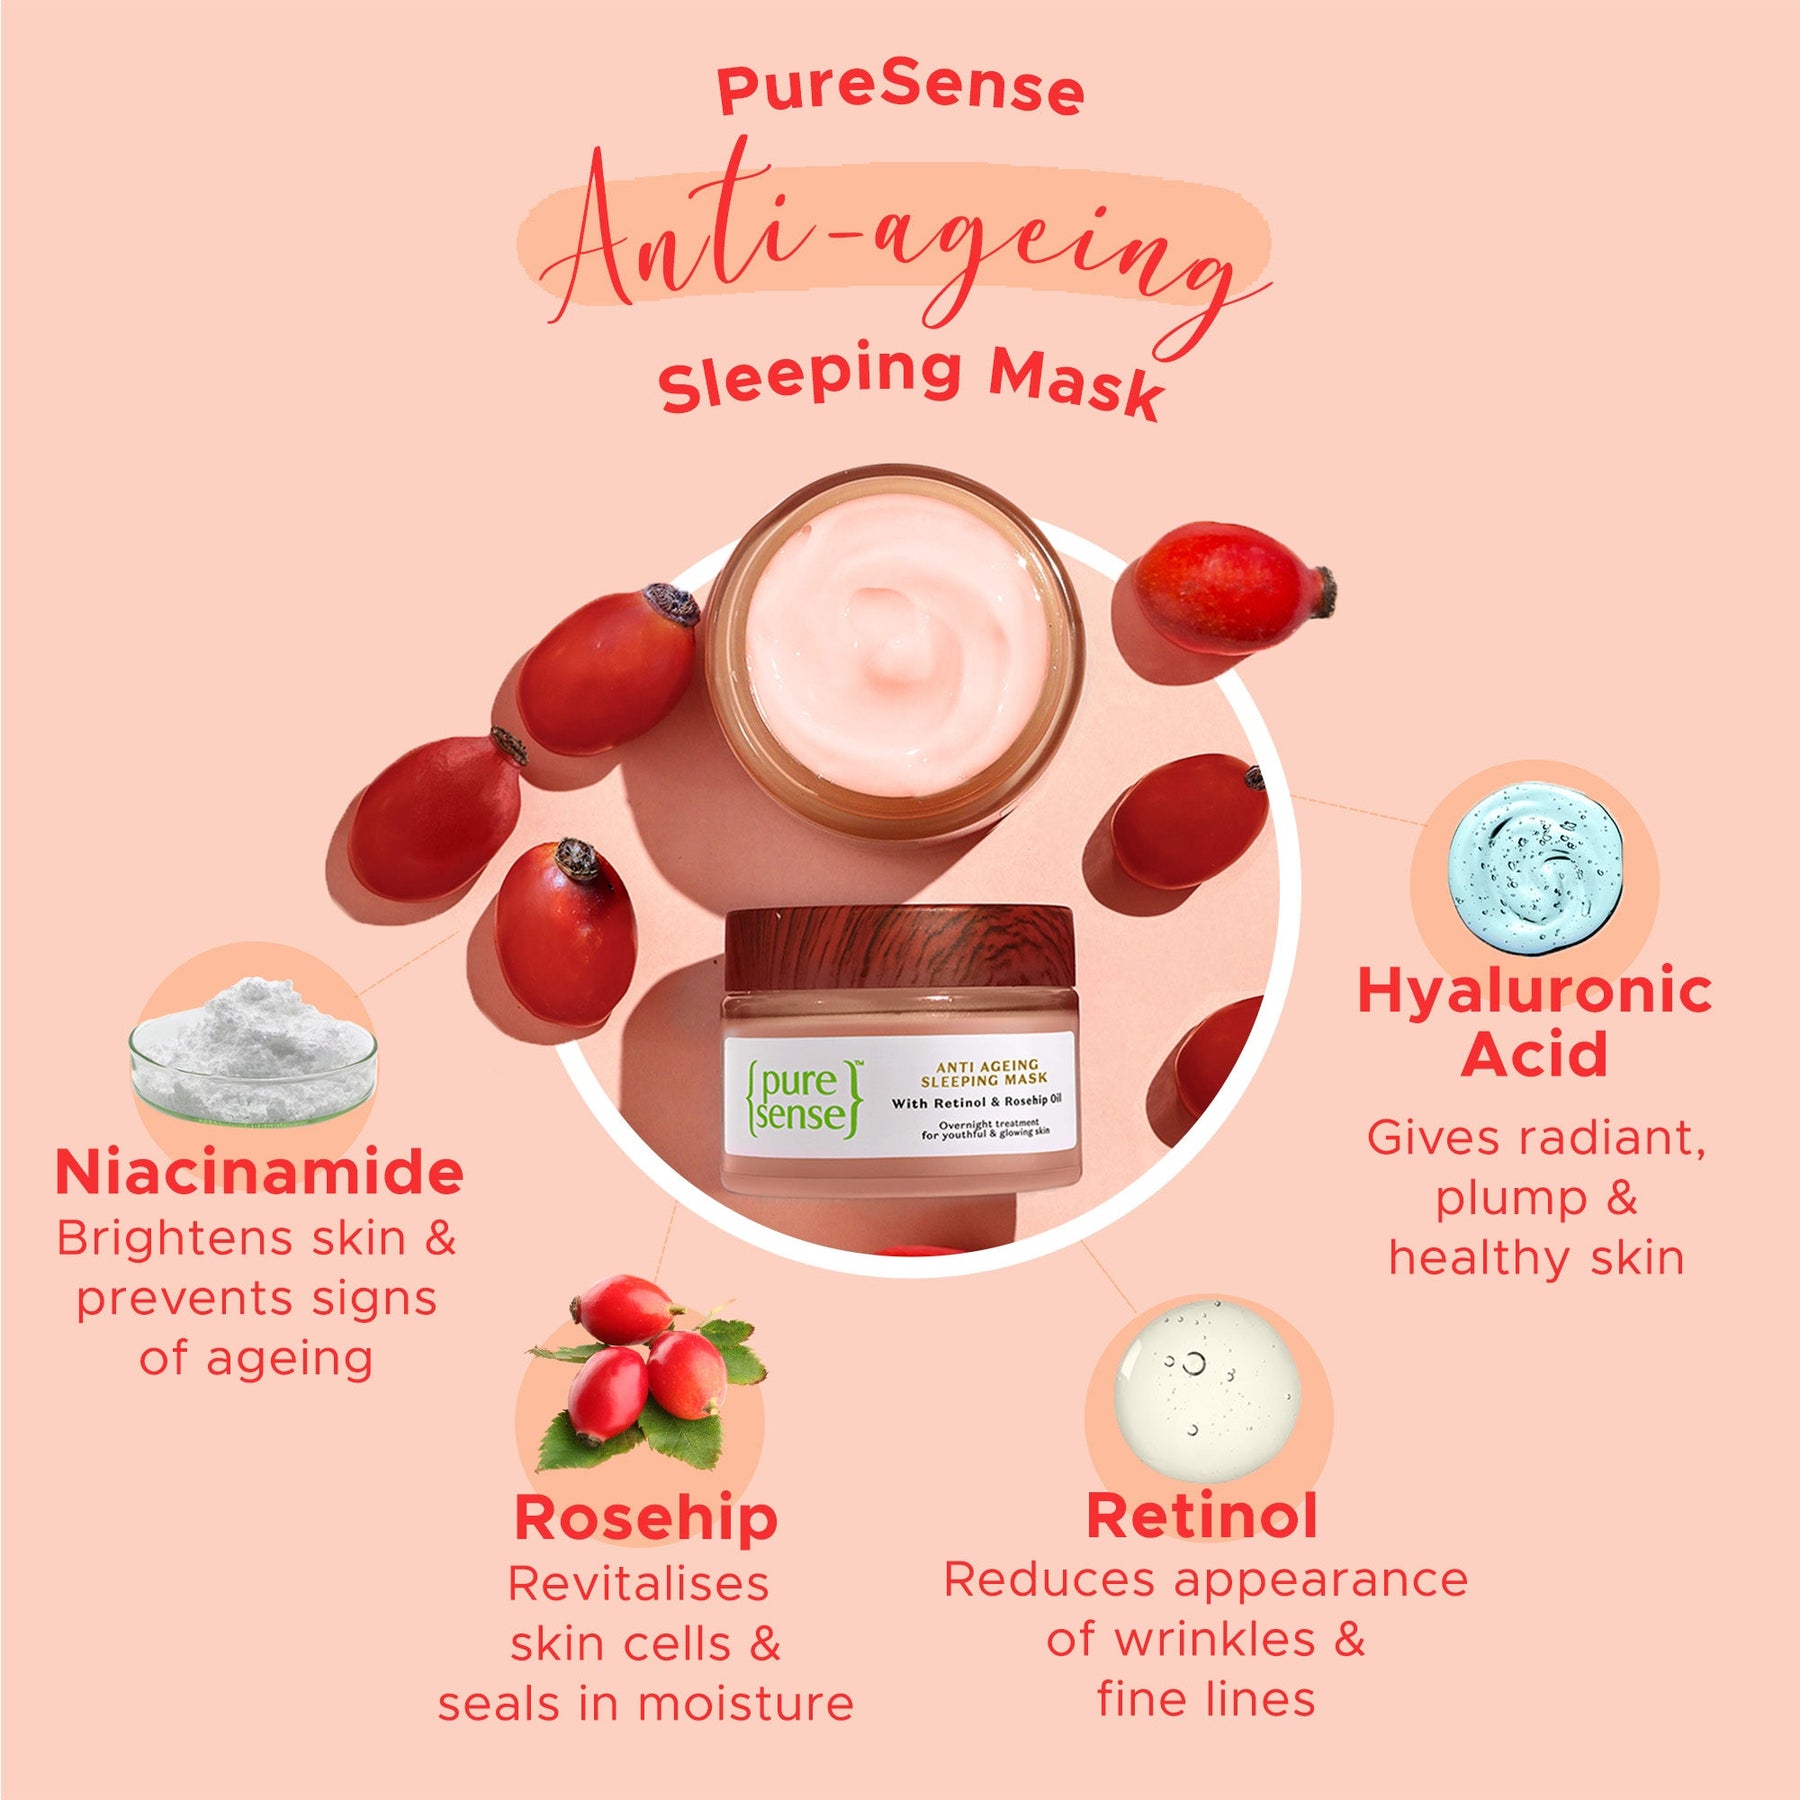 [CRED] Anti-ageing Sleeping Mask | Paraben & Sulphate Free |  From the makers of Parachute Advansed | 50gm